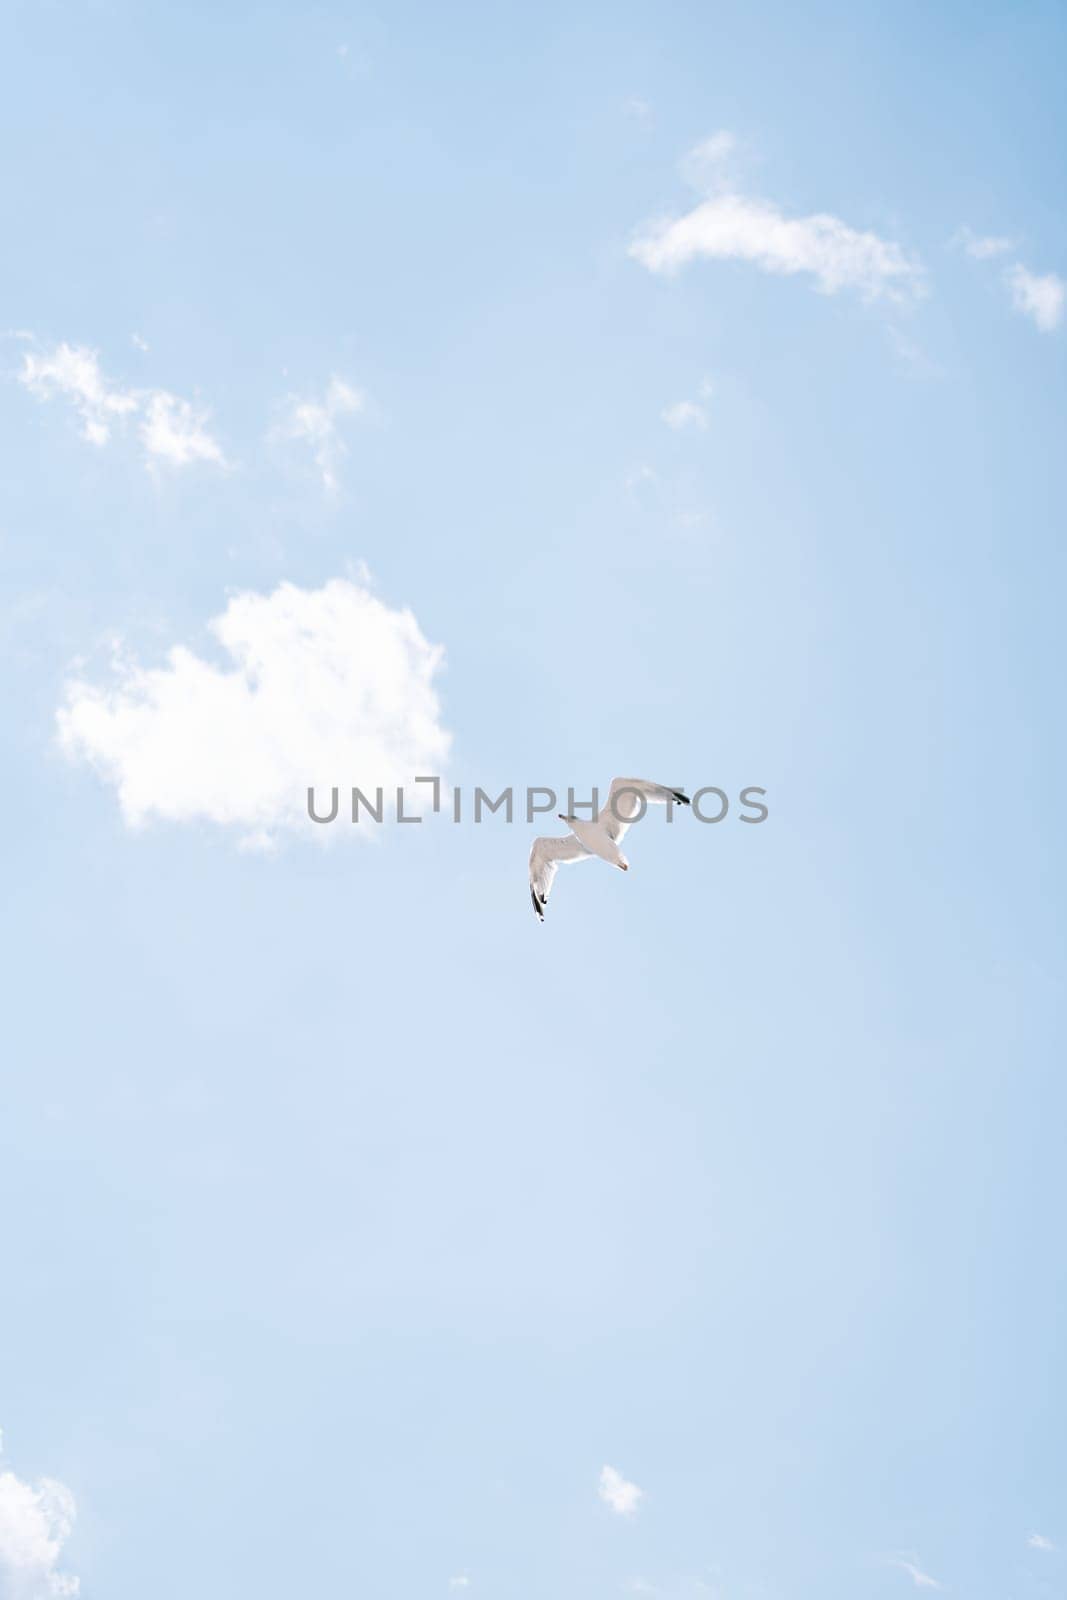 White seagull soars in the cloudy sky. High quality photo